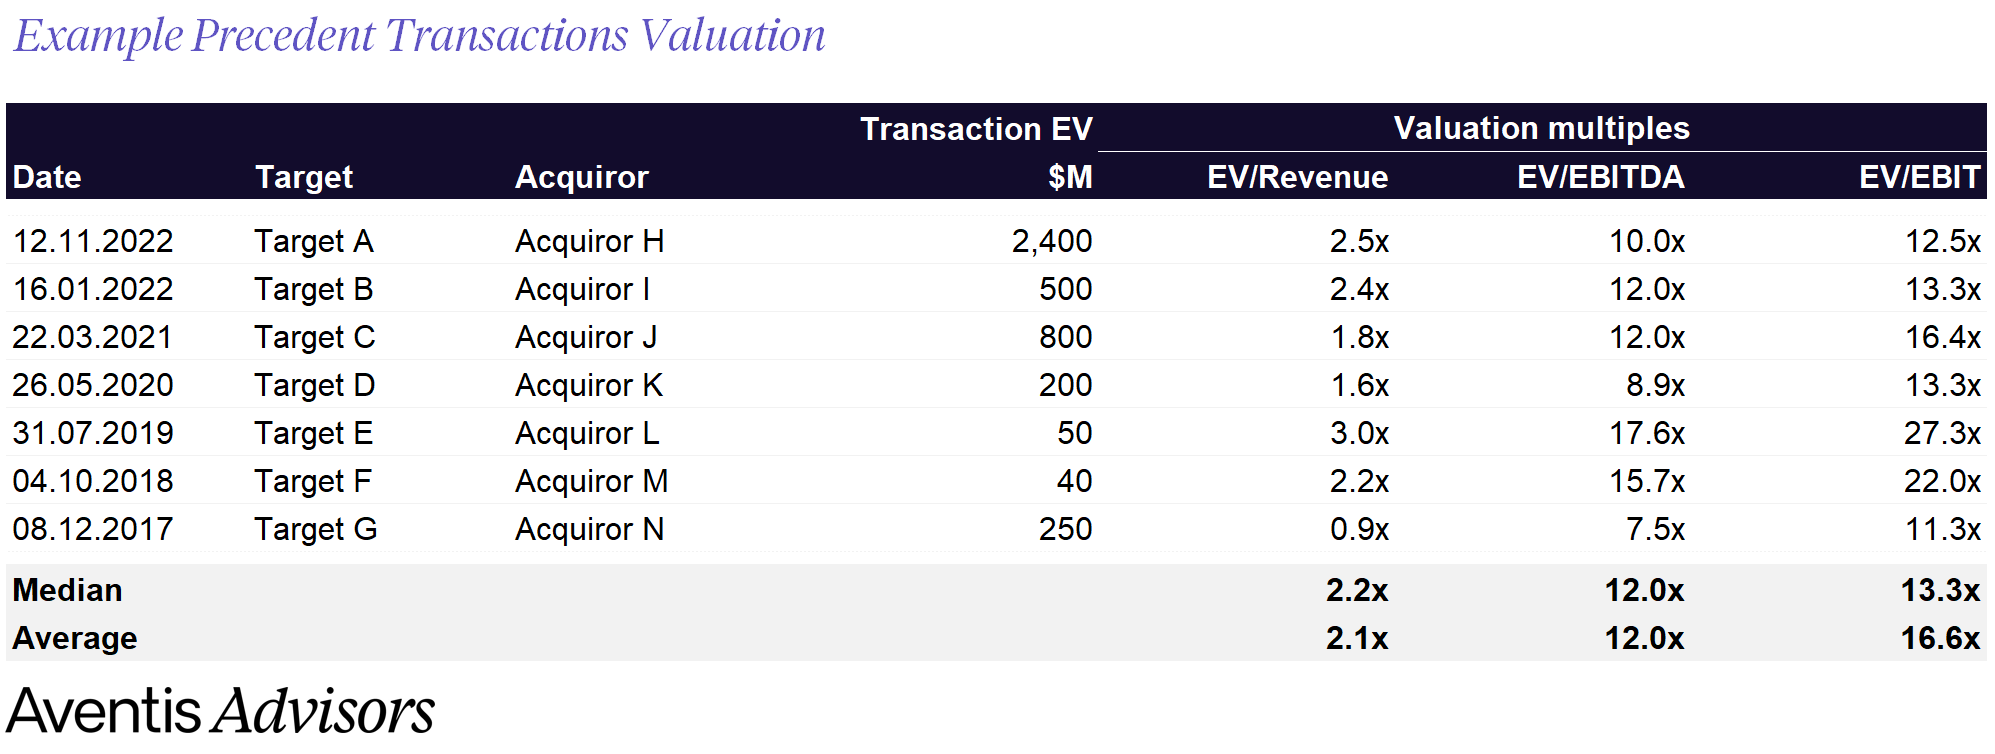 Example precedent transactions valuation for a tech company